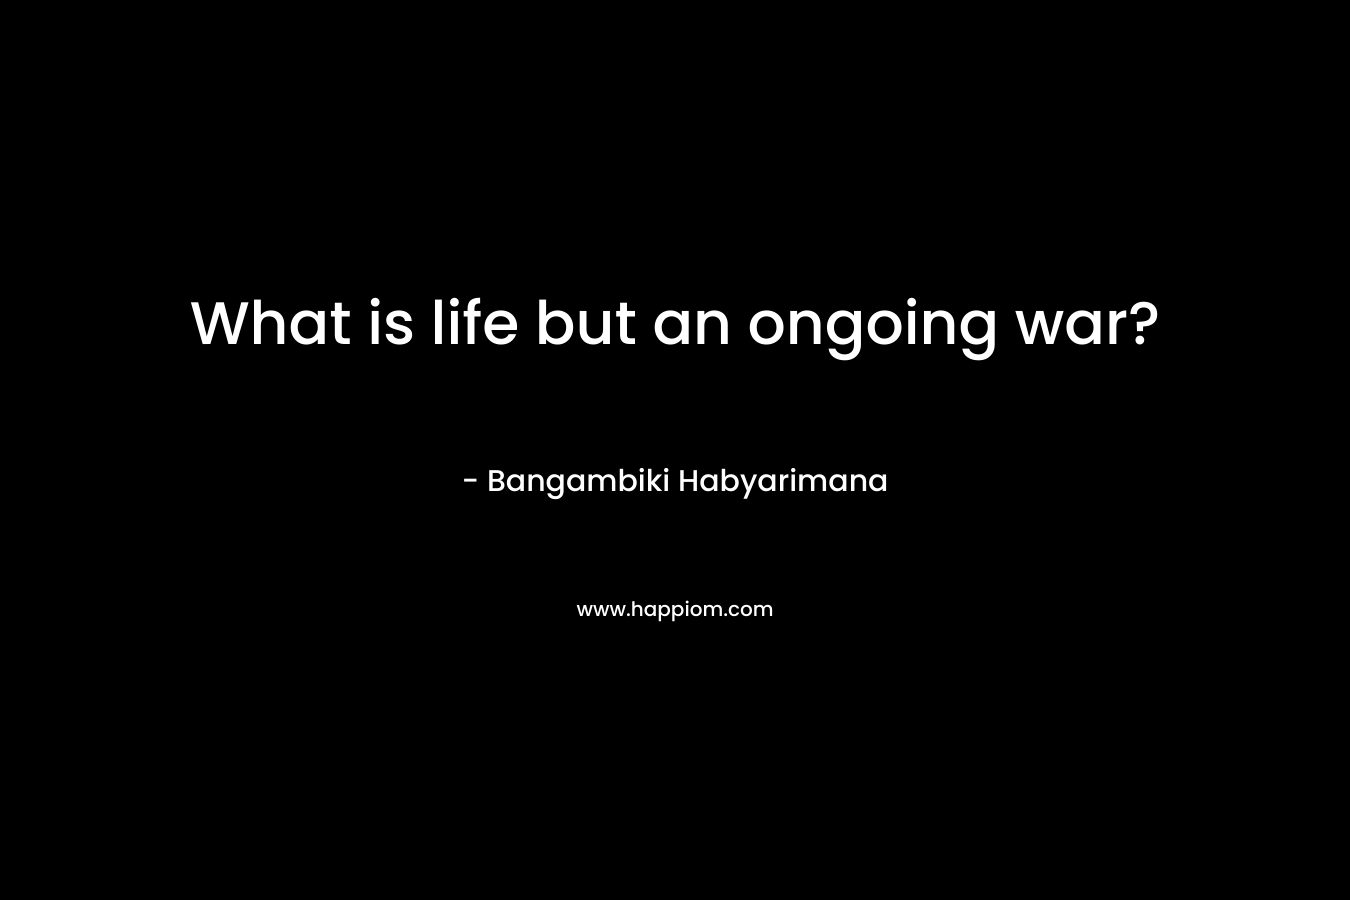 What is life but an ongoing war?